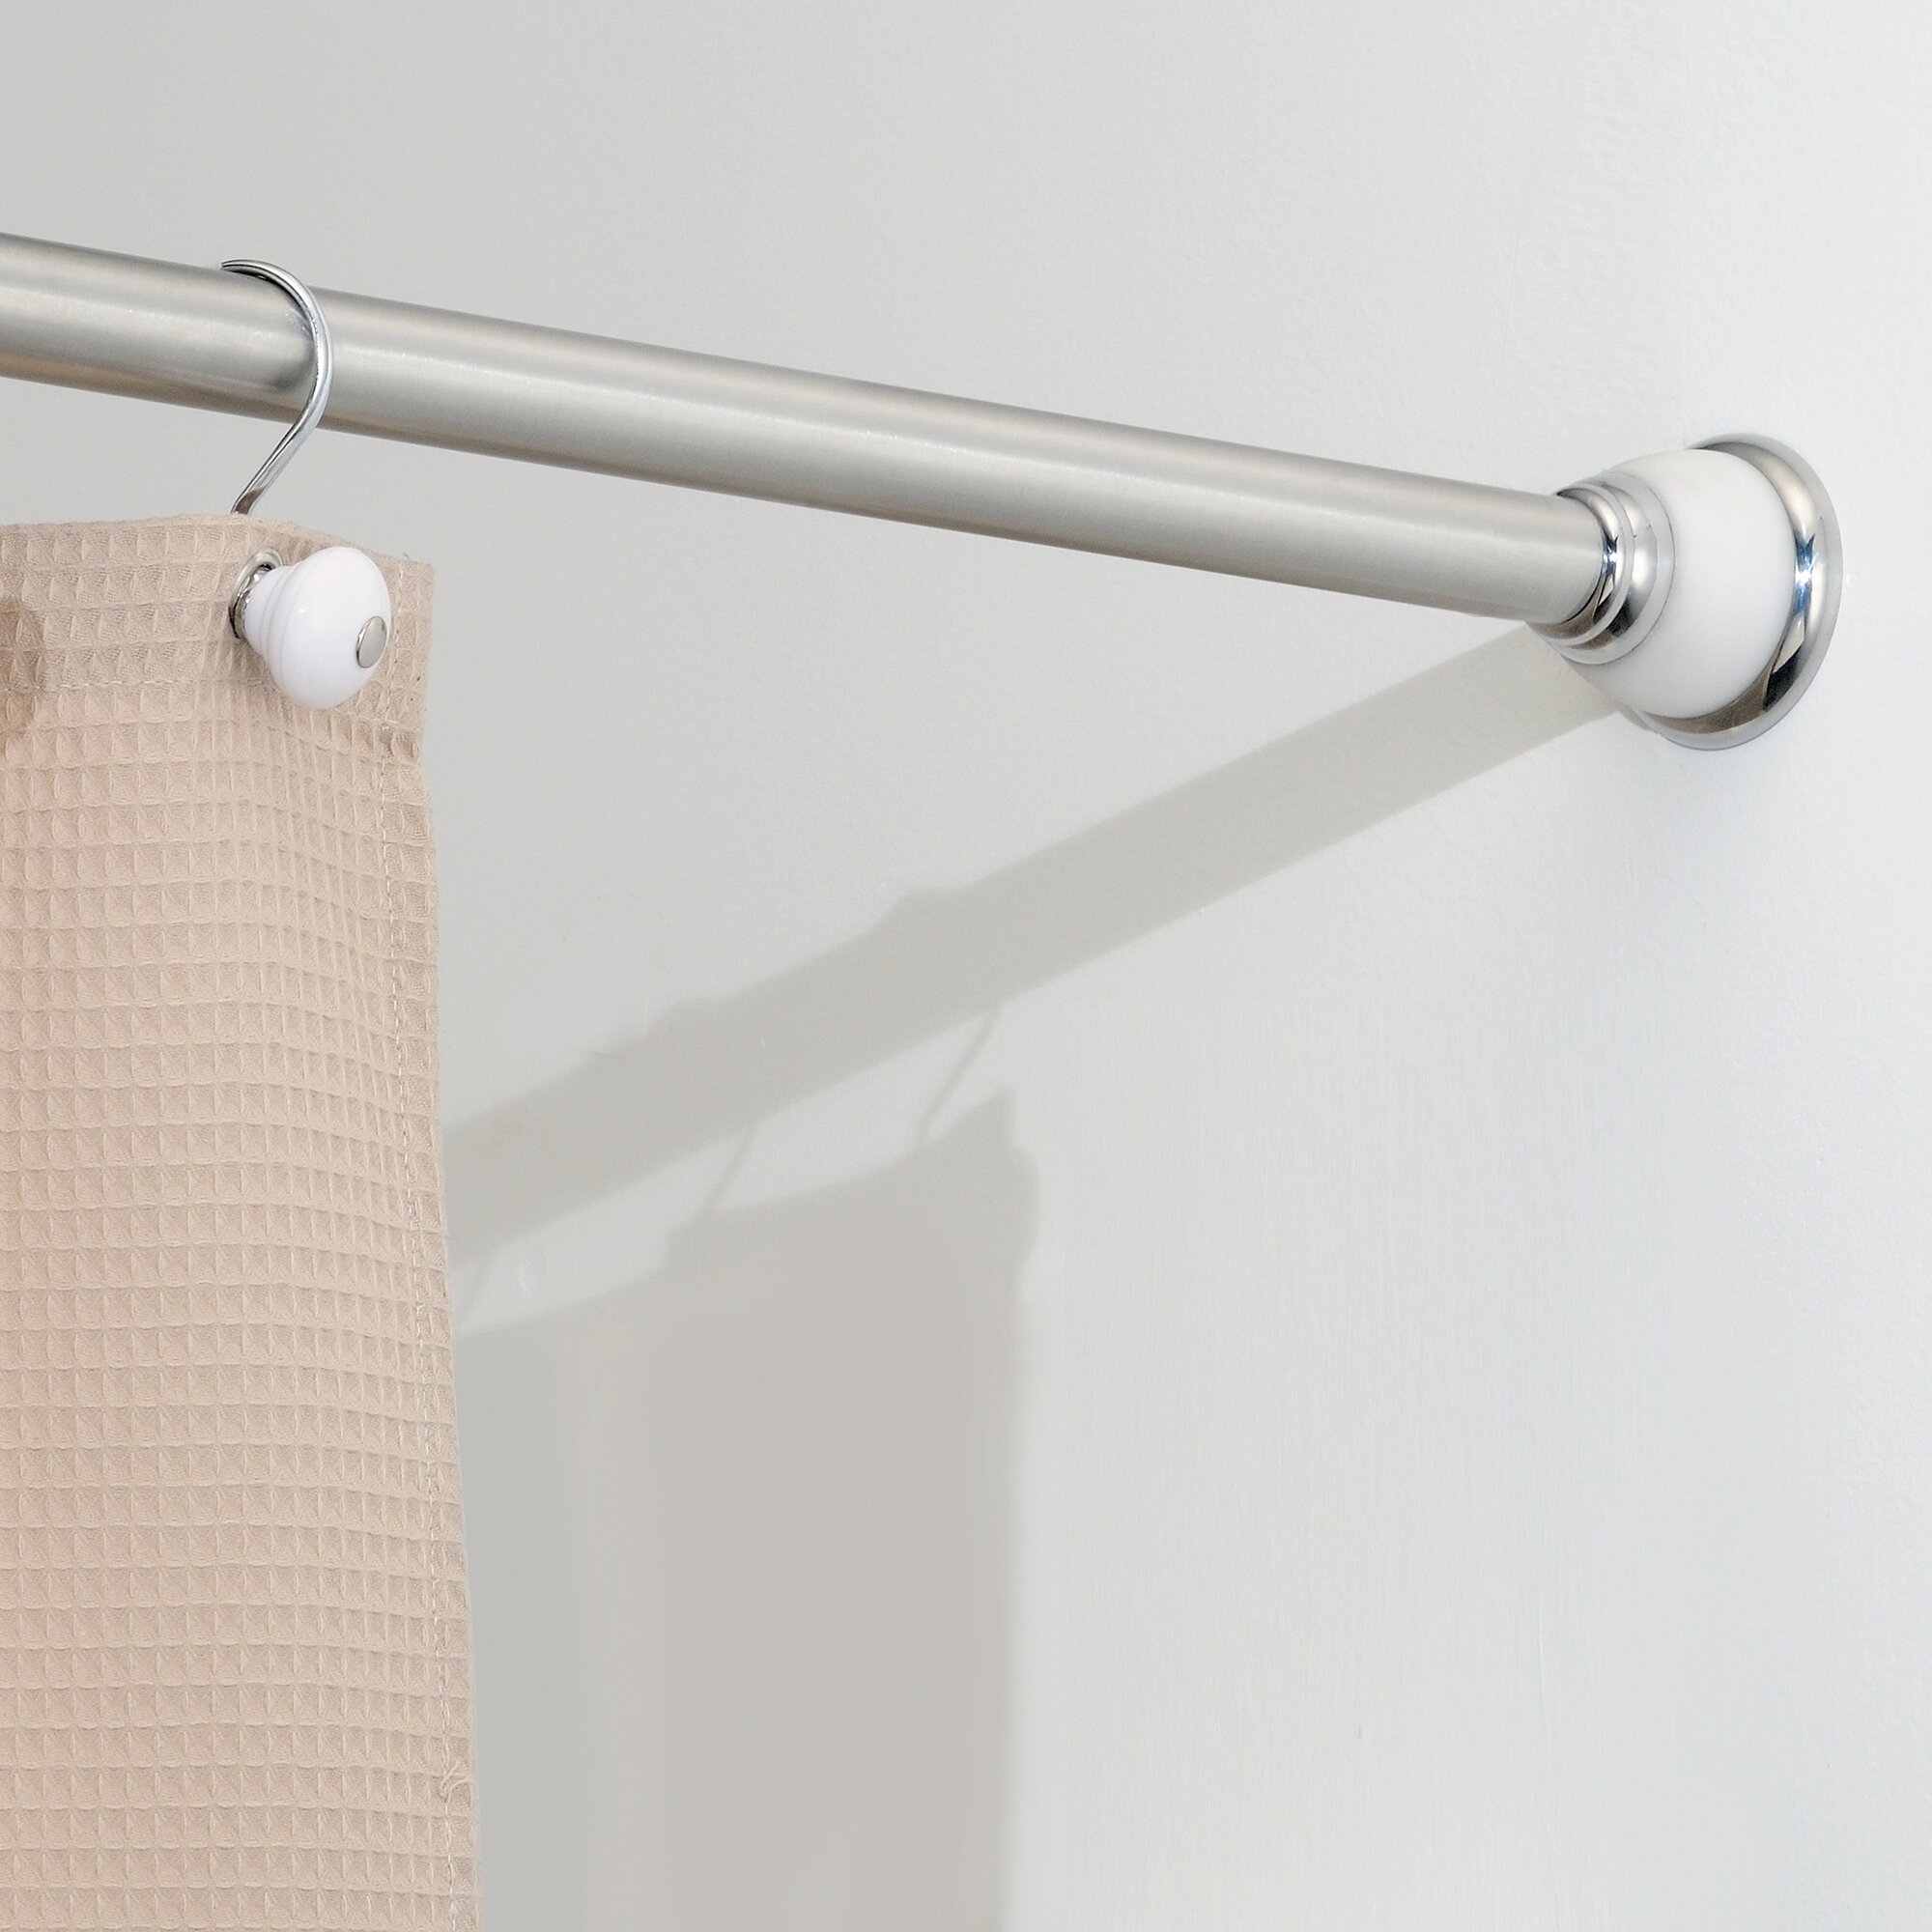 Retractable Shower Rod | Shower Curtain Tension Rod | Fixed Shower Rod